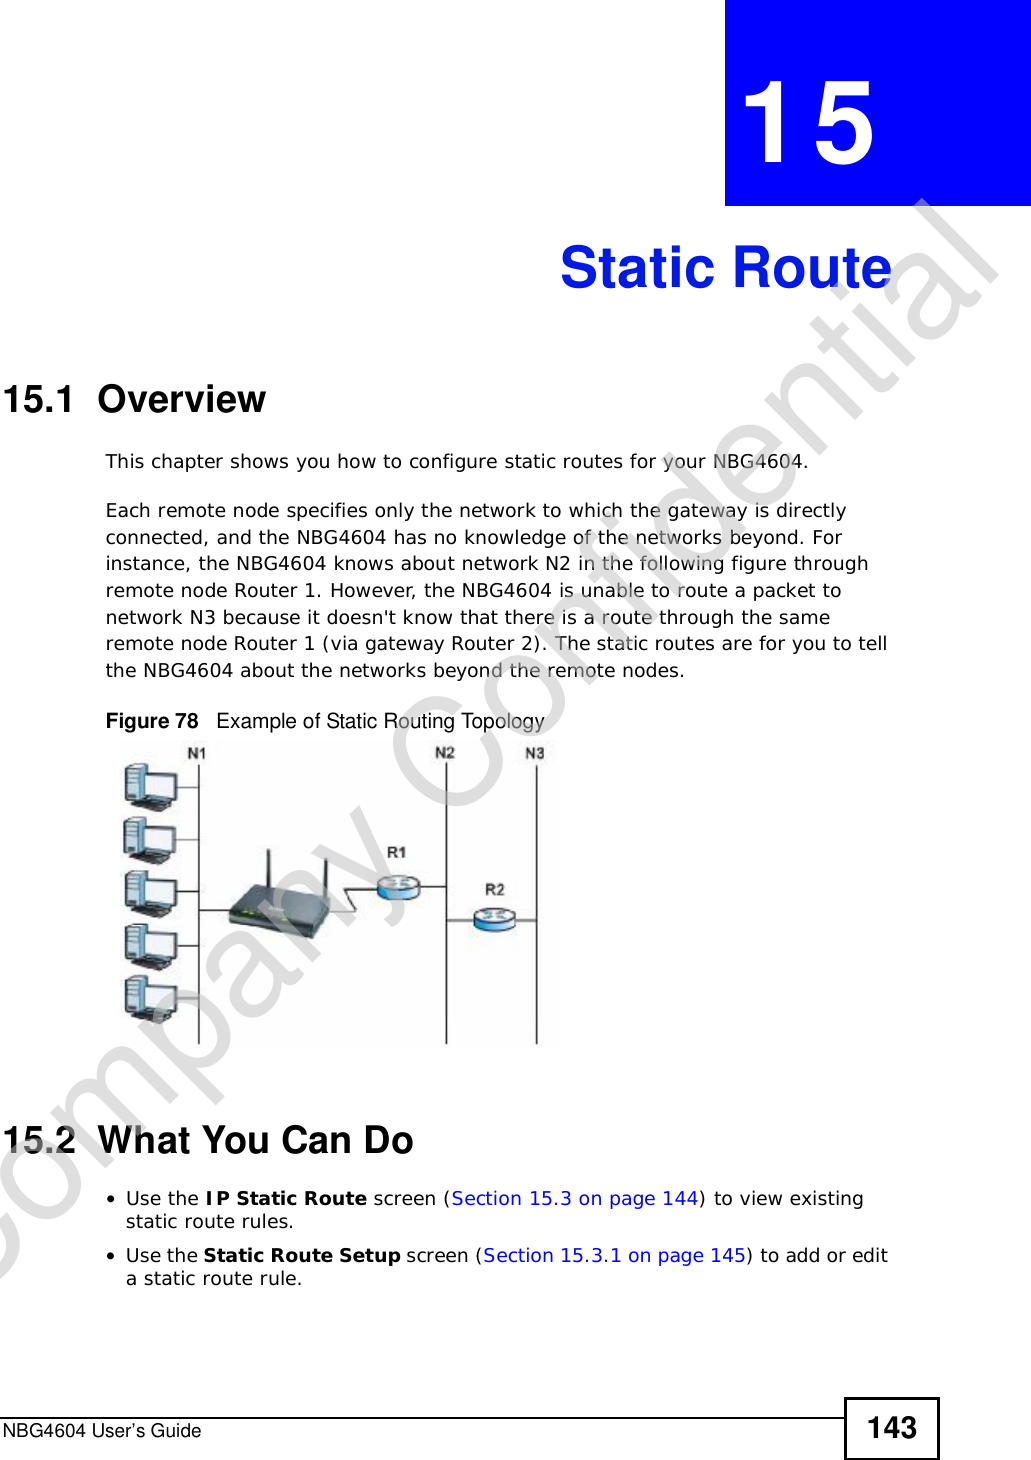 NBG4604 User’s Guide 143CHAPTER 15Static Route15.1  OverviewThis chapter shows you how to configure static routes for your NBG4604.Each remote node specifies only the network to which the gateway is directly connected, and the NBG4604 has no knowledge of the networks beyond. For instance, the NBG4604 knows about network N2 in the following figure through remote node Router 1. However, the NBG4604 is unable to route a packet to network N3 because it doesn&apos;t know that there is a route through the same remote node Router 1 (via gateway Router 2). The static routes are for you to tell the NBG4604 about the networks beyond the remote nodes.Figure 78   Example of Static Routing Topology15.2  What You Can Do•Use the IP Static Route screen (Section 15.3 on page 144) to view existing static route rules.•Use the Static Route Setup screen (Section 15.3.1 on page 145) to add or edit a static route rule.Company Confidential